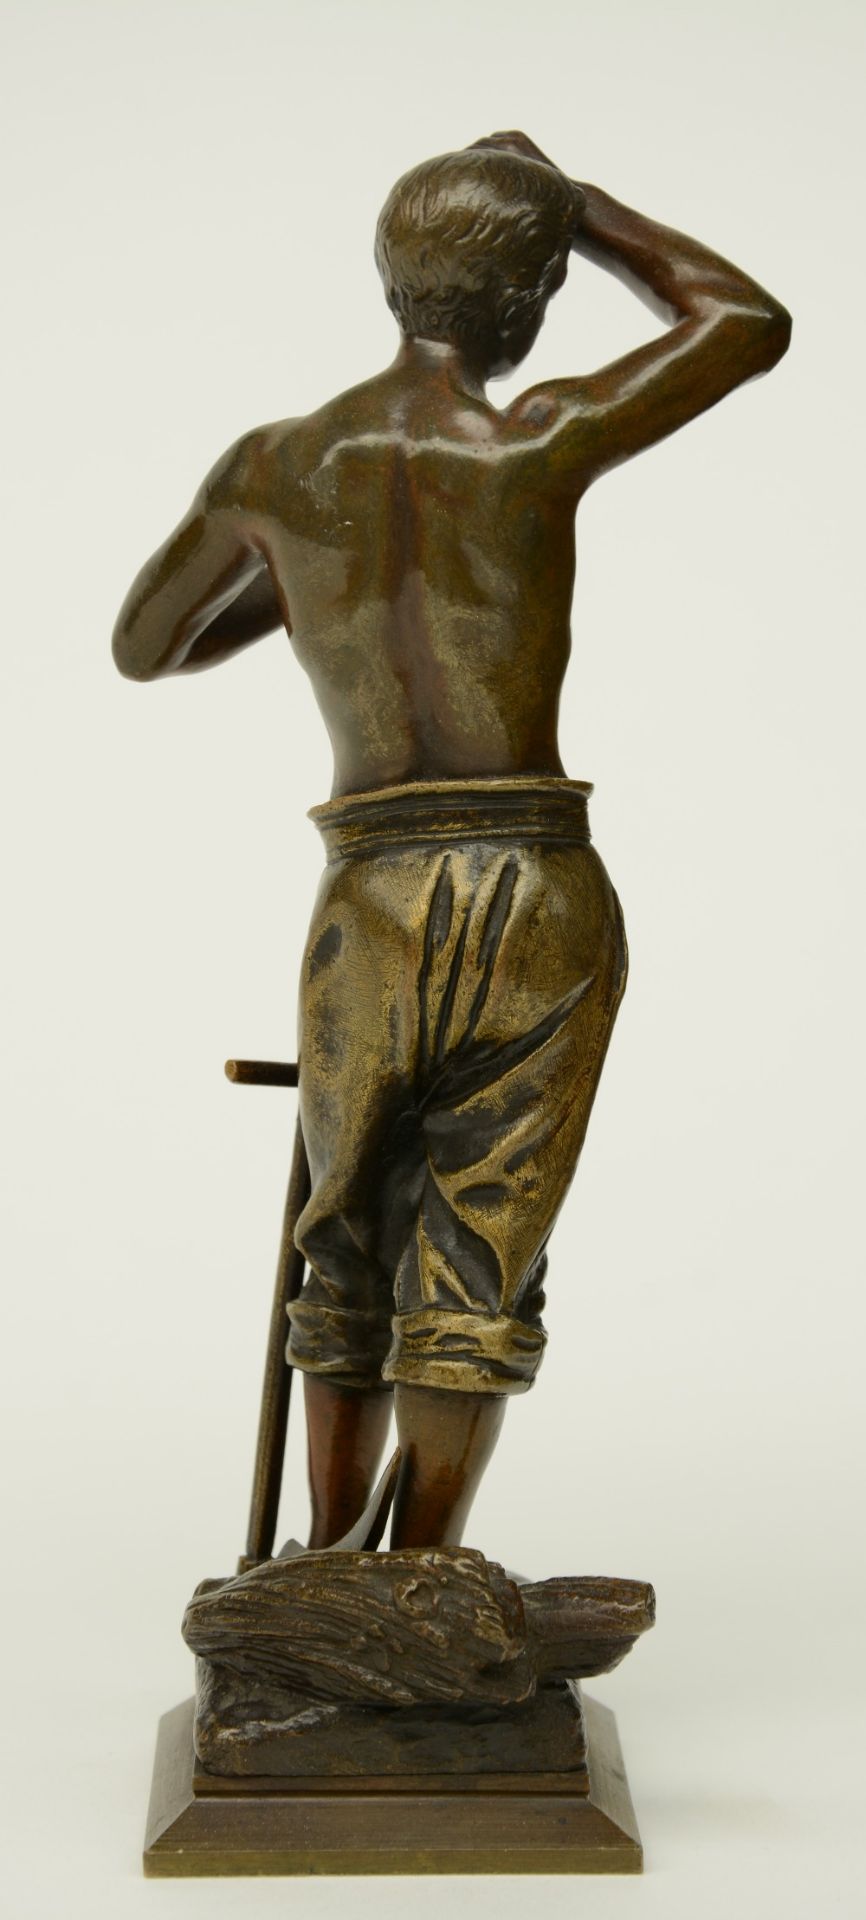 Causse J., patinated bronze sculpture depicting a mower, H 20 cm - Image 3 of 7